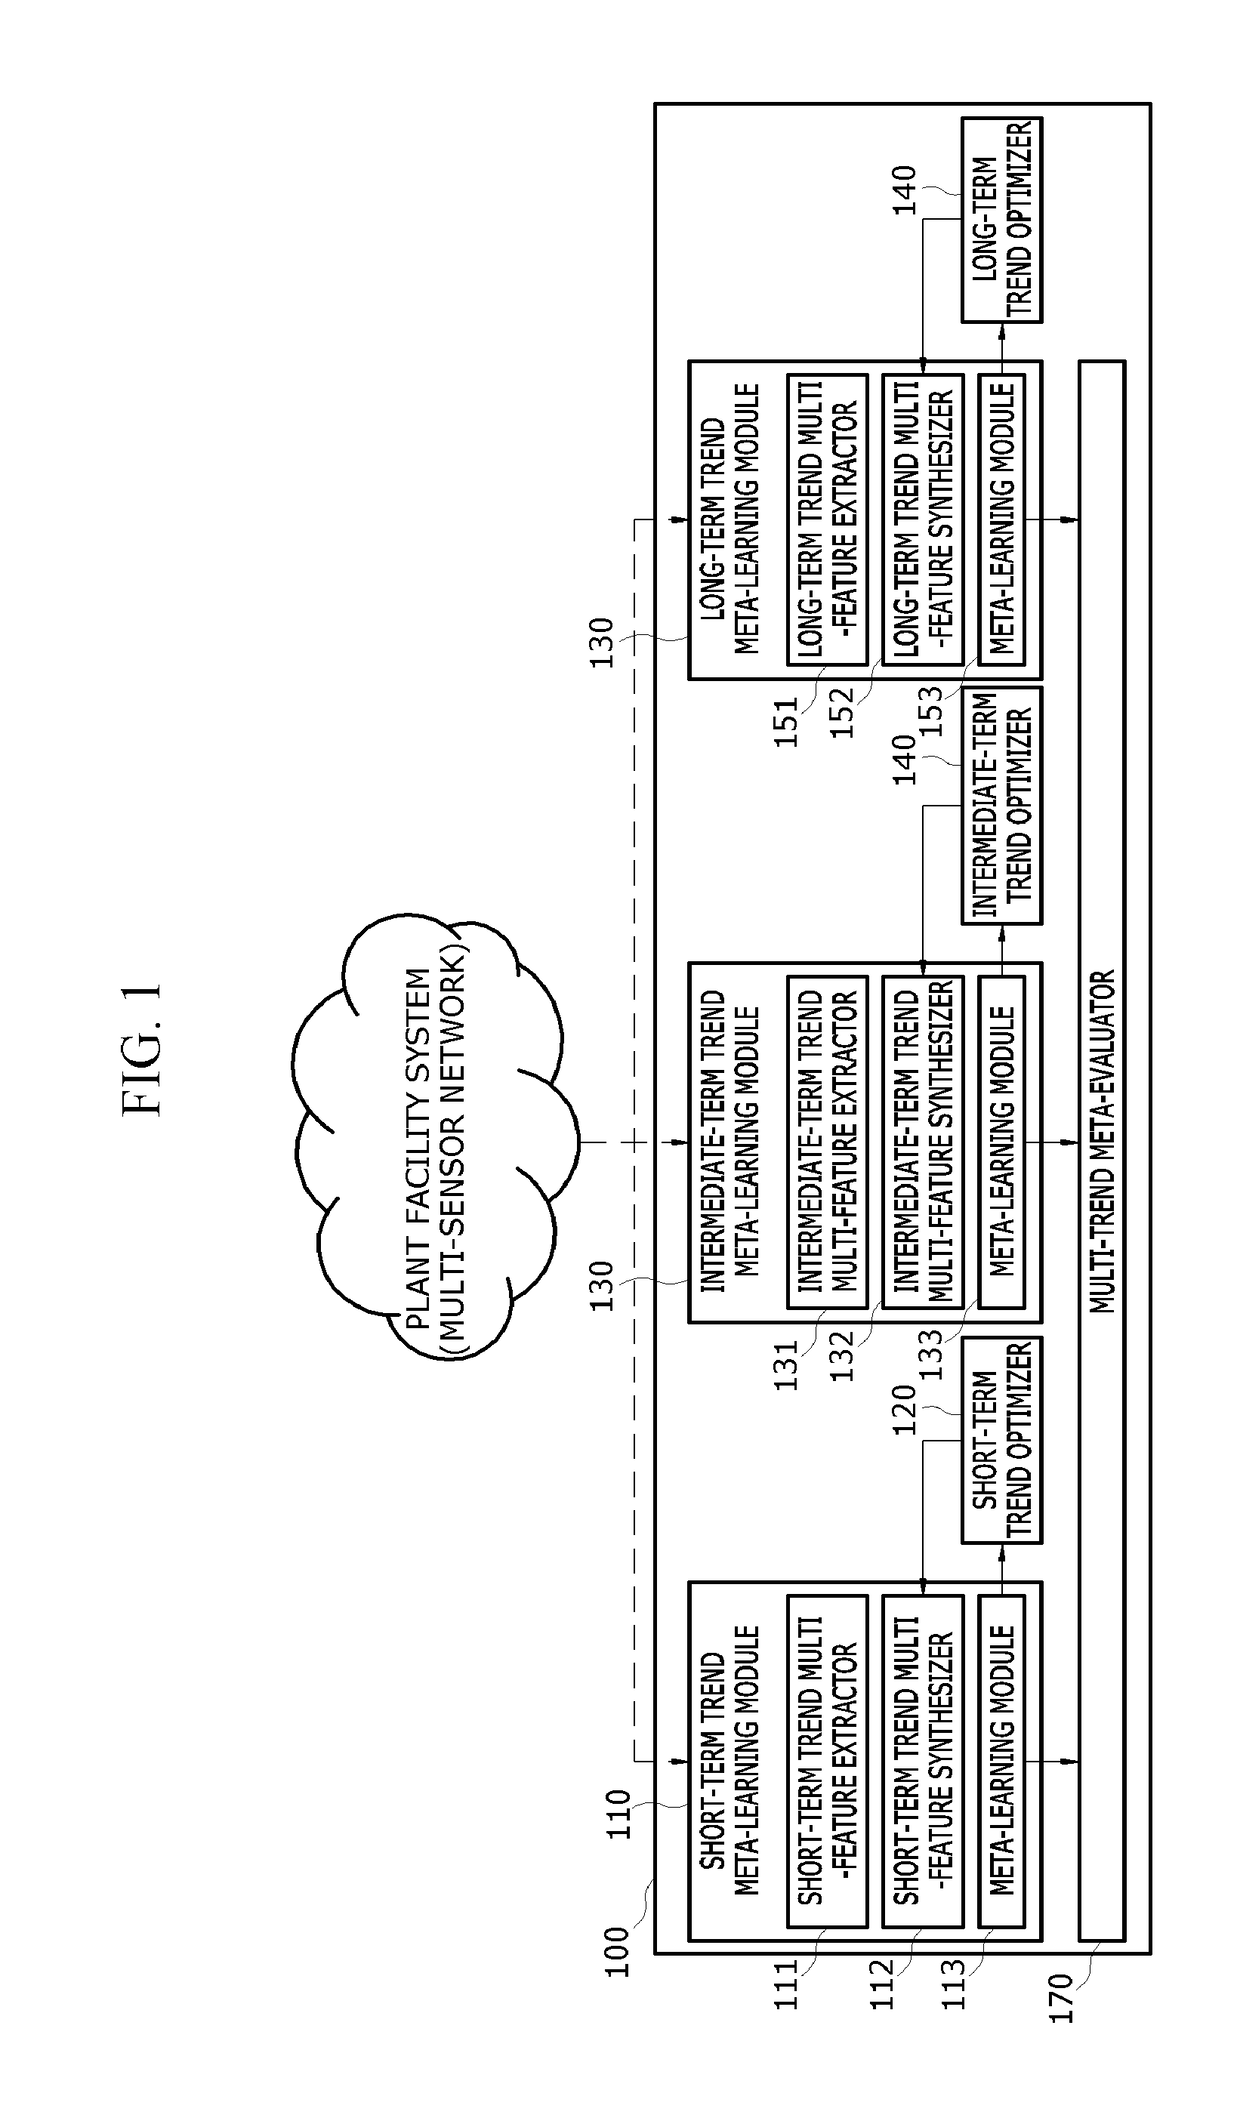 Apparatus and method for detecting anomaly in plant pipe using multiple meta-learning